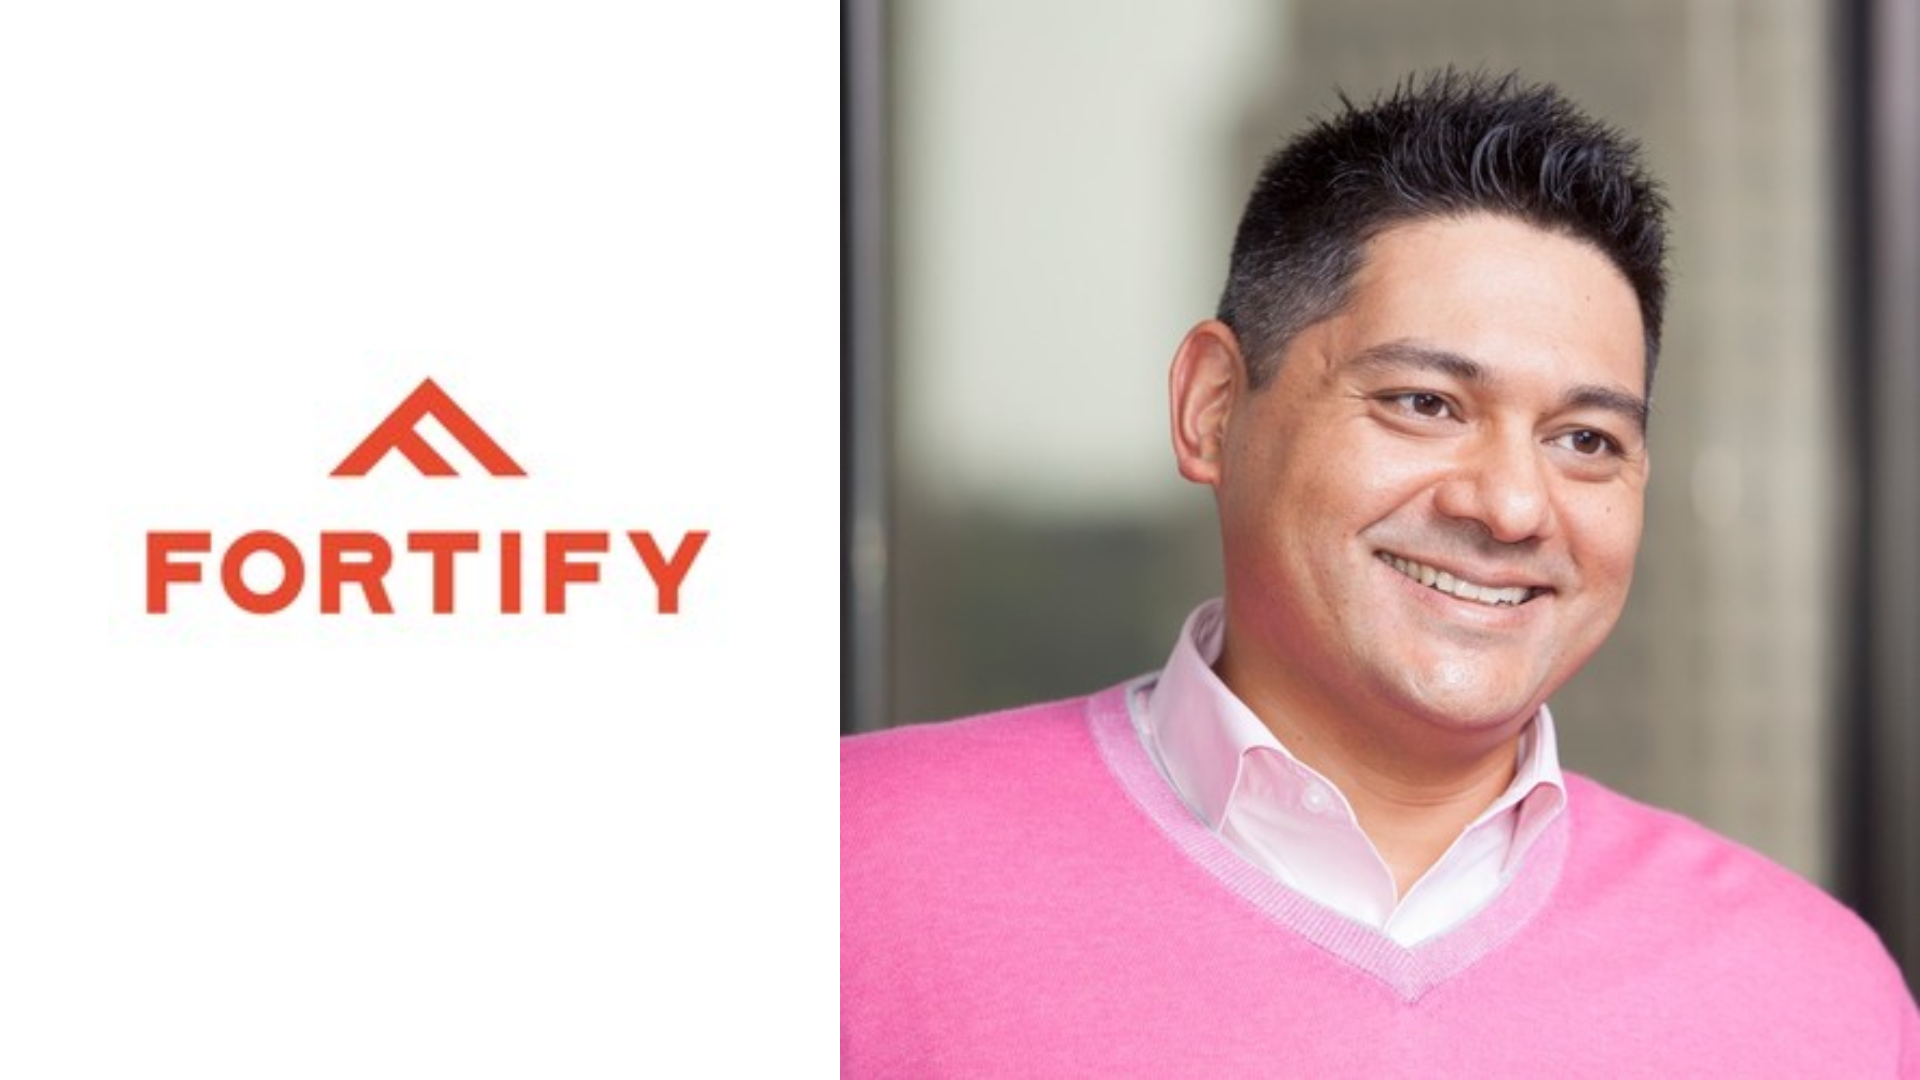 Fortify announced Lawrence Ganti will succeed Josh Martin as CEO. Josh Martin, Co-Founder and CEO becomes Chief Product Officer.